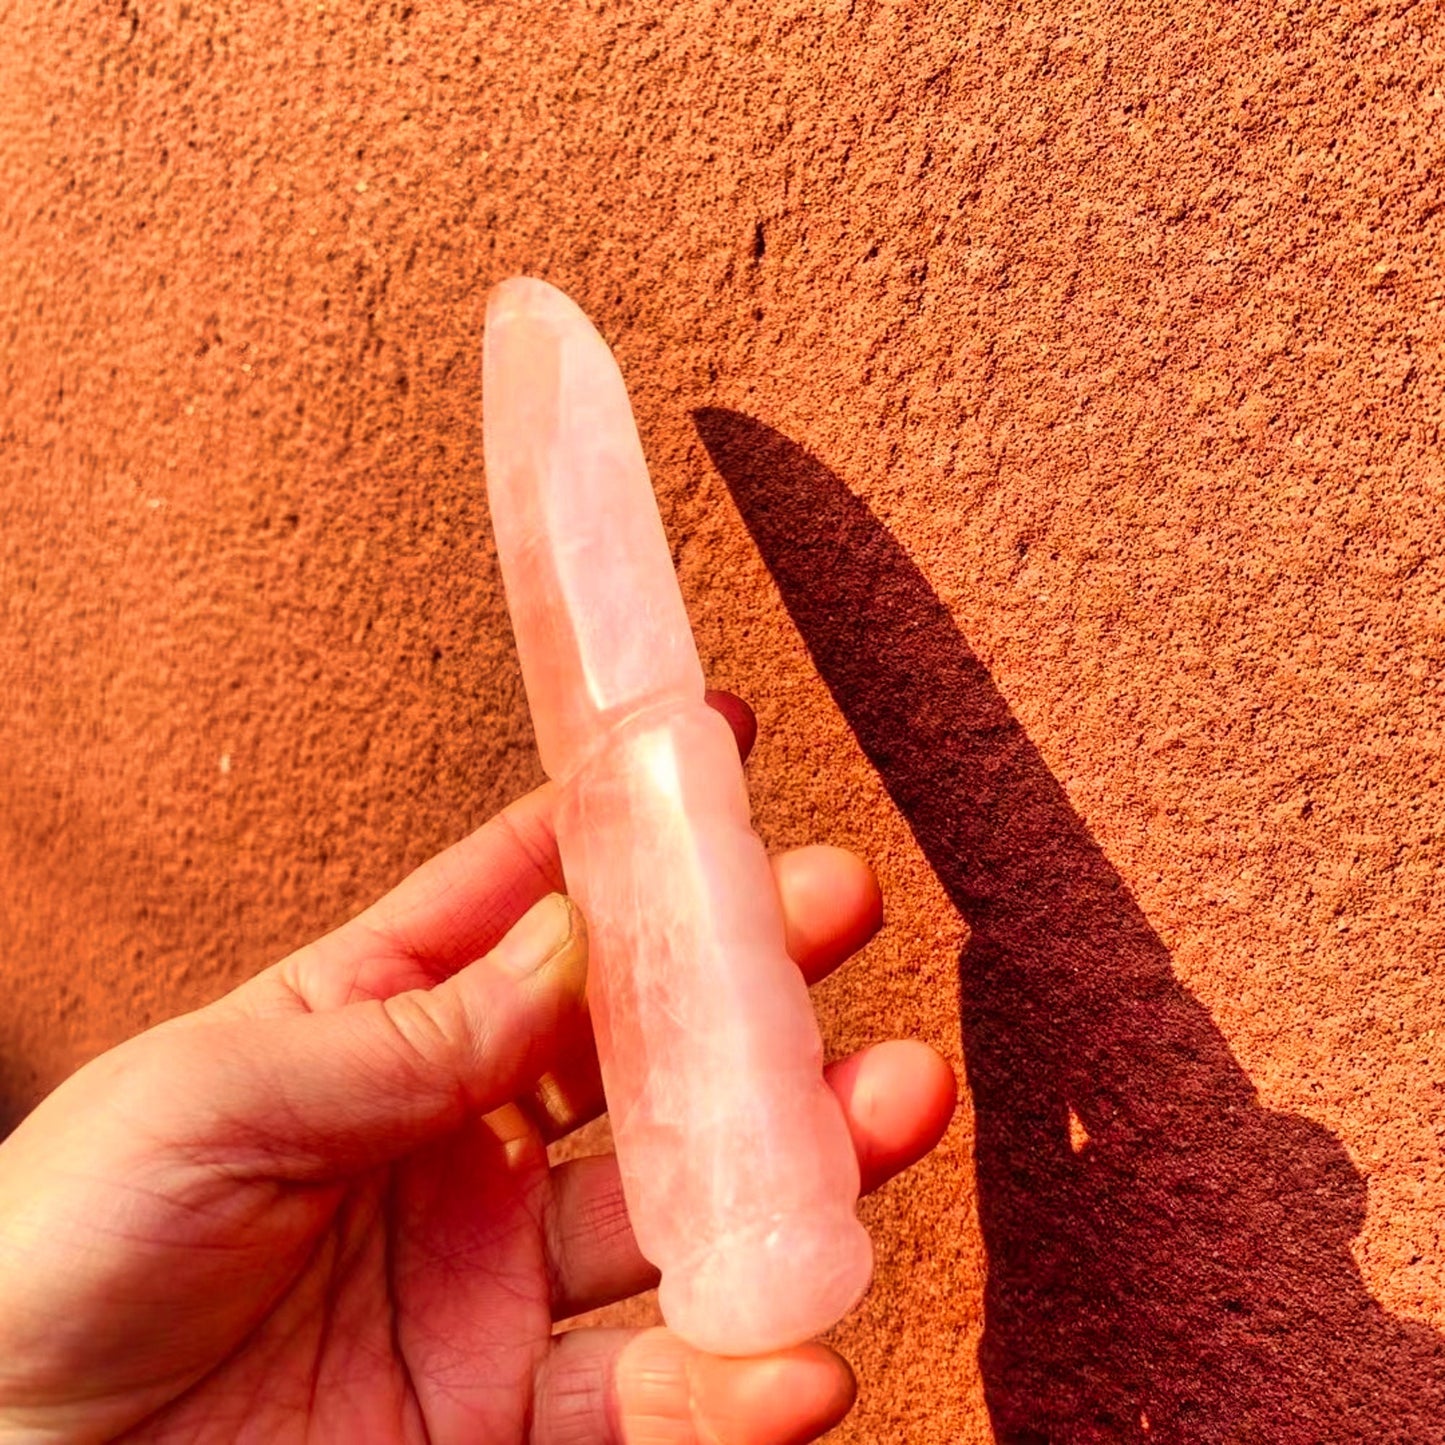 Handmade 150mm Natural Pink Rose Quartz Crystal Dagger for Healing, Protection, and Witchcraft - Men's Gift and Magic Talisman Sword